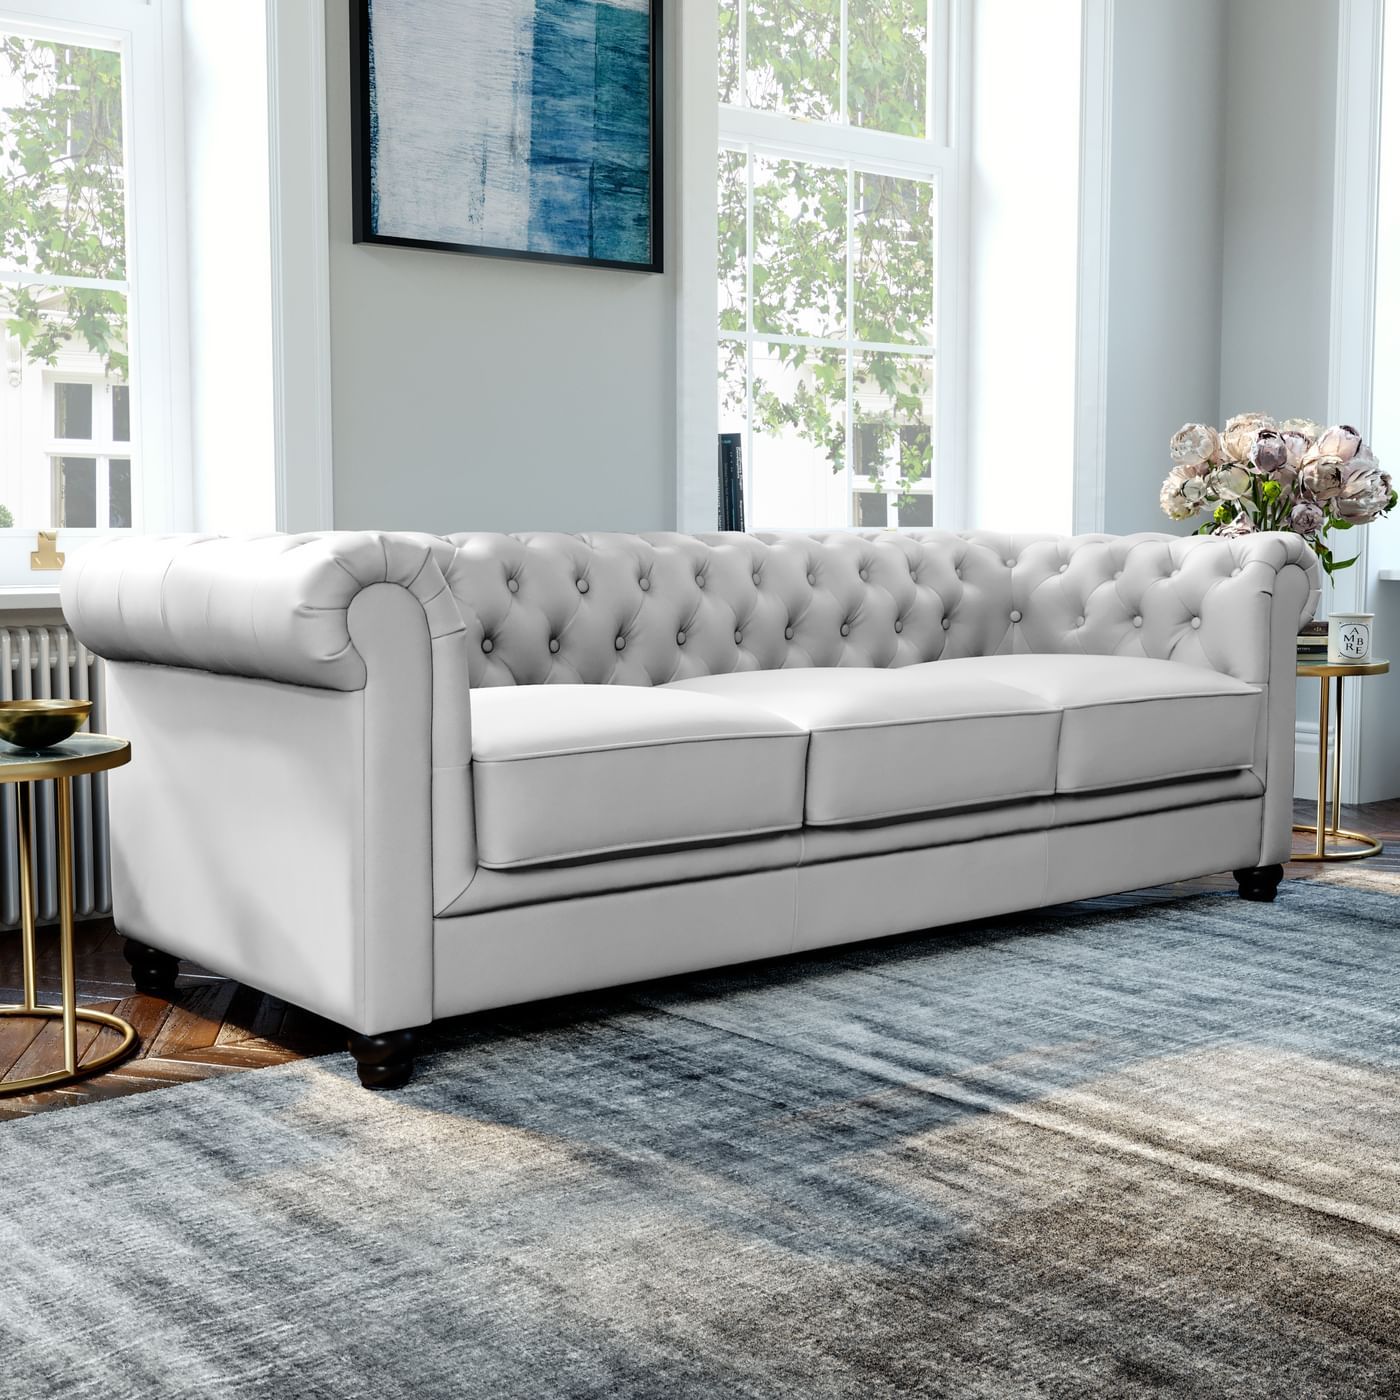 Hampton Light Grey Leather 3 Seater Chesterfield Sofa | Furniture Choice With Sofas In Light Grey (Gallery 3 of 20)